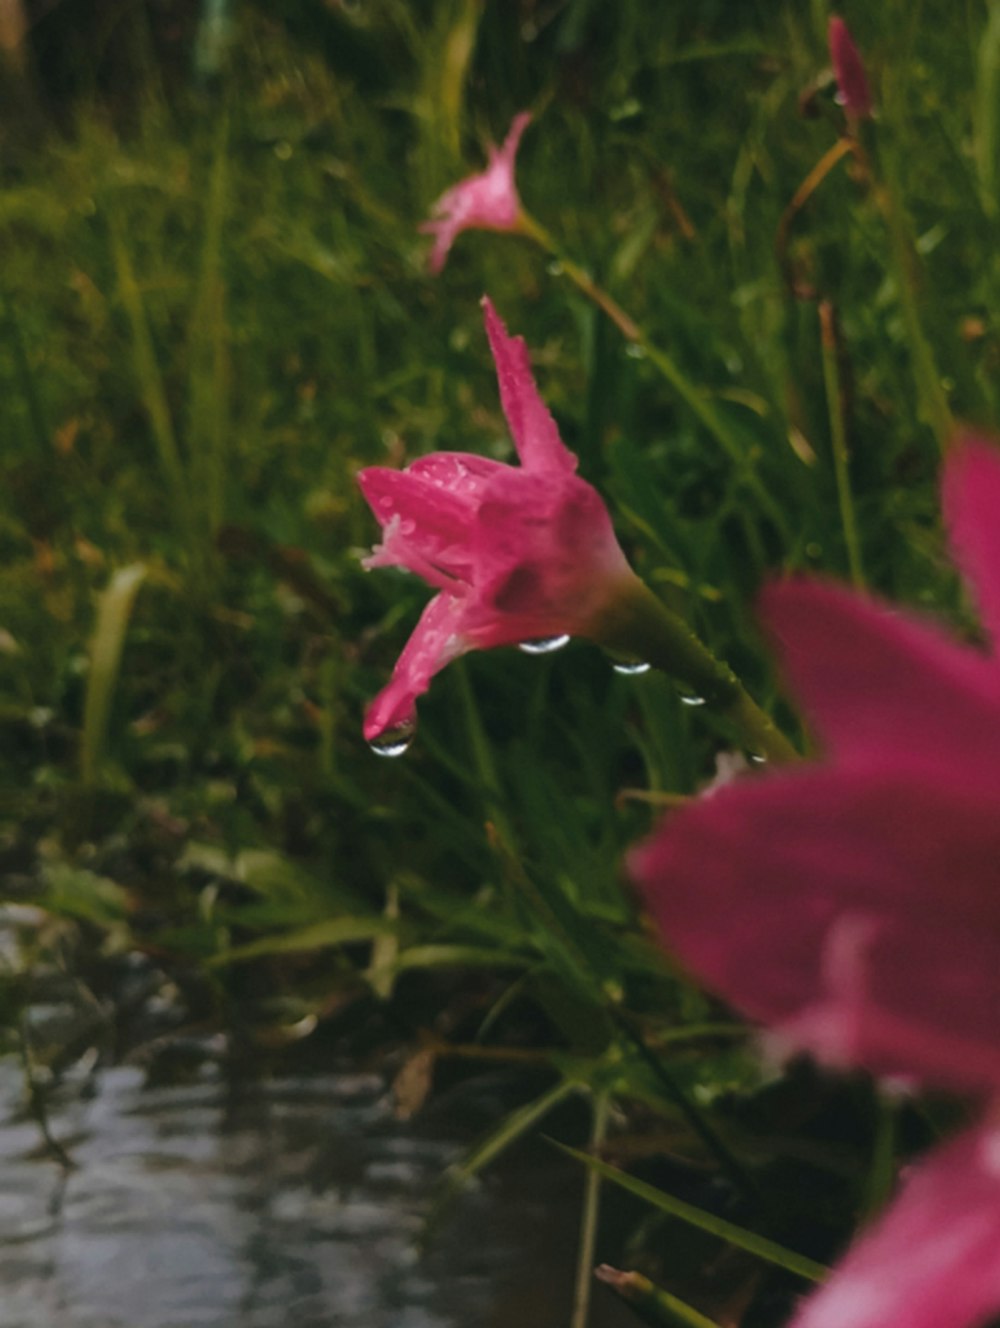 a close up of a pink flower near a body of water